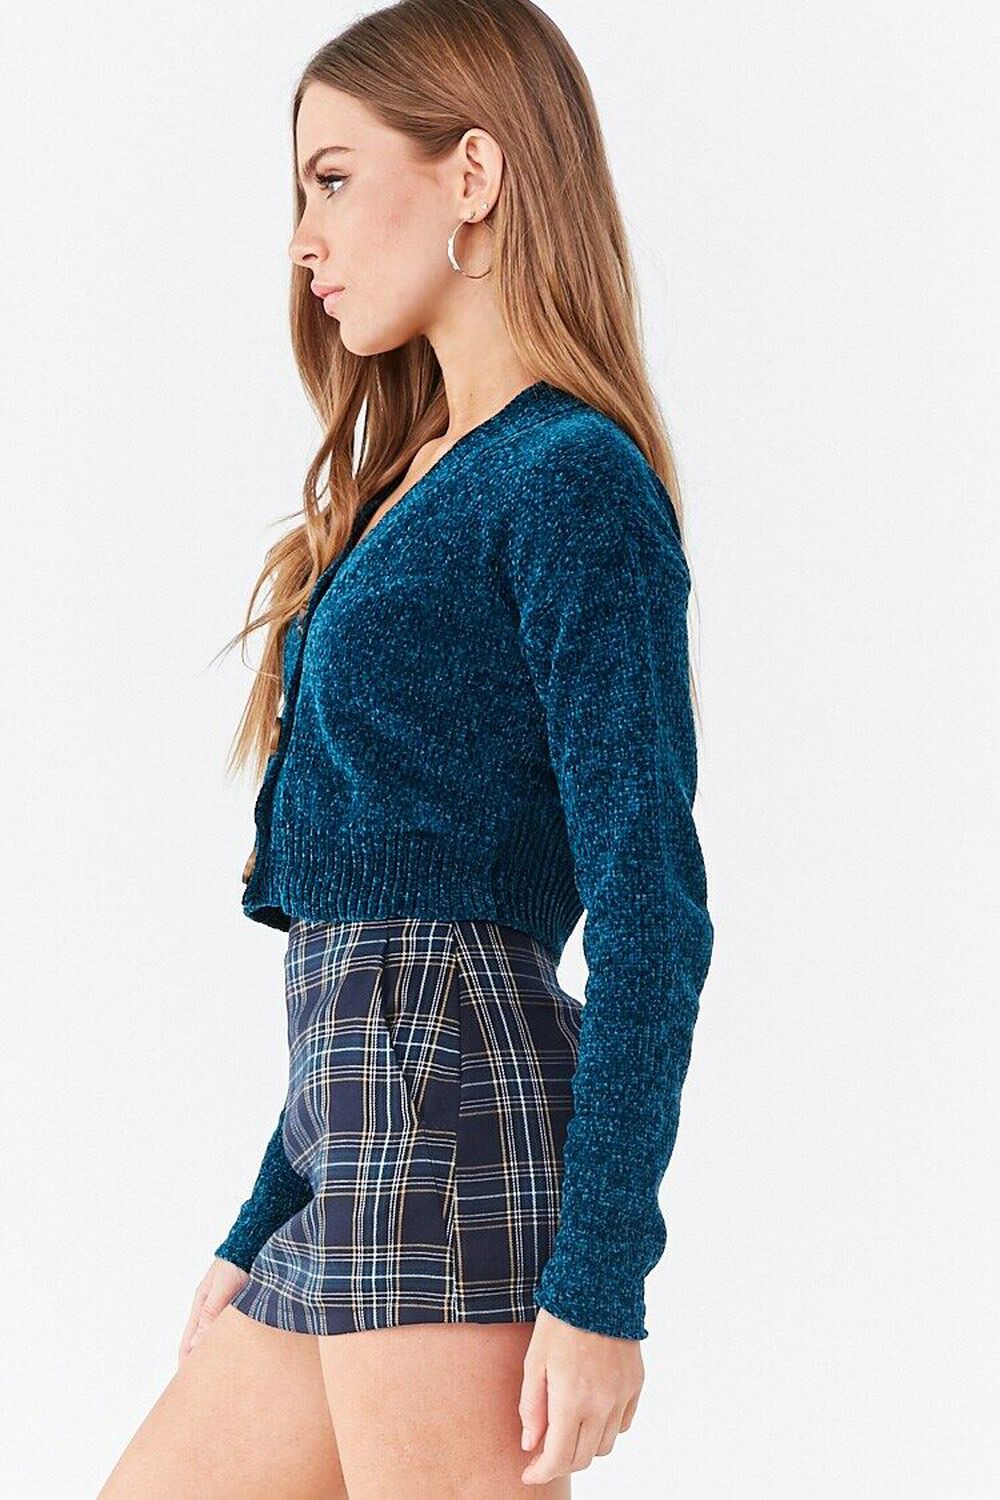 Forever 21 Cropped Chenille Sweater  Fashion knit sweater, Sweaters, Chenille  sweater